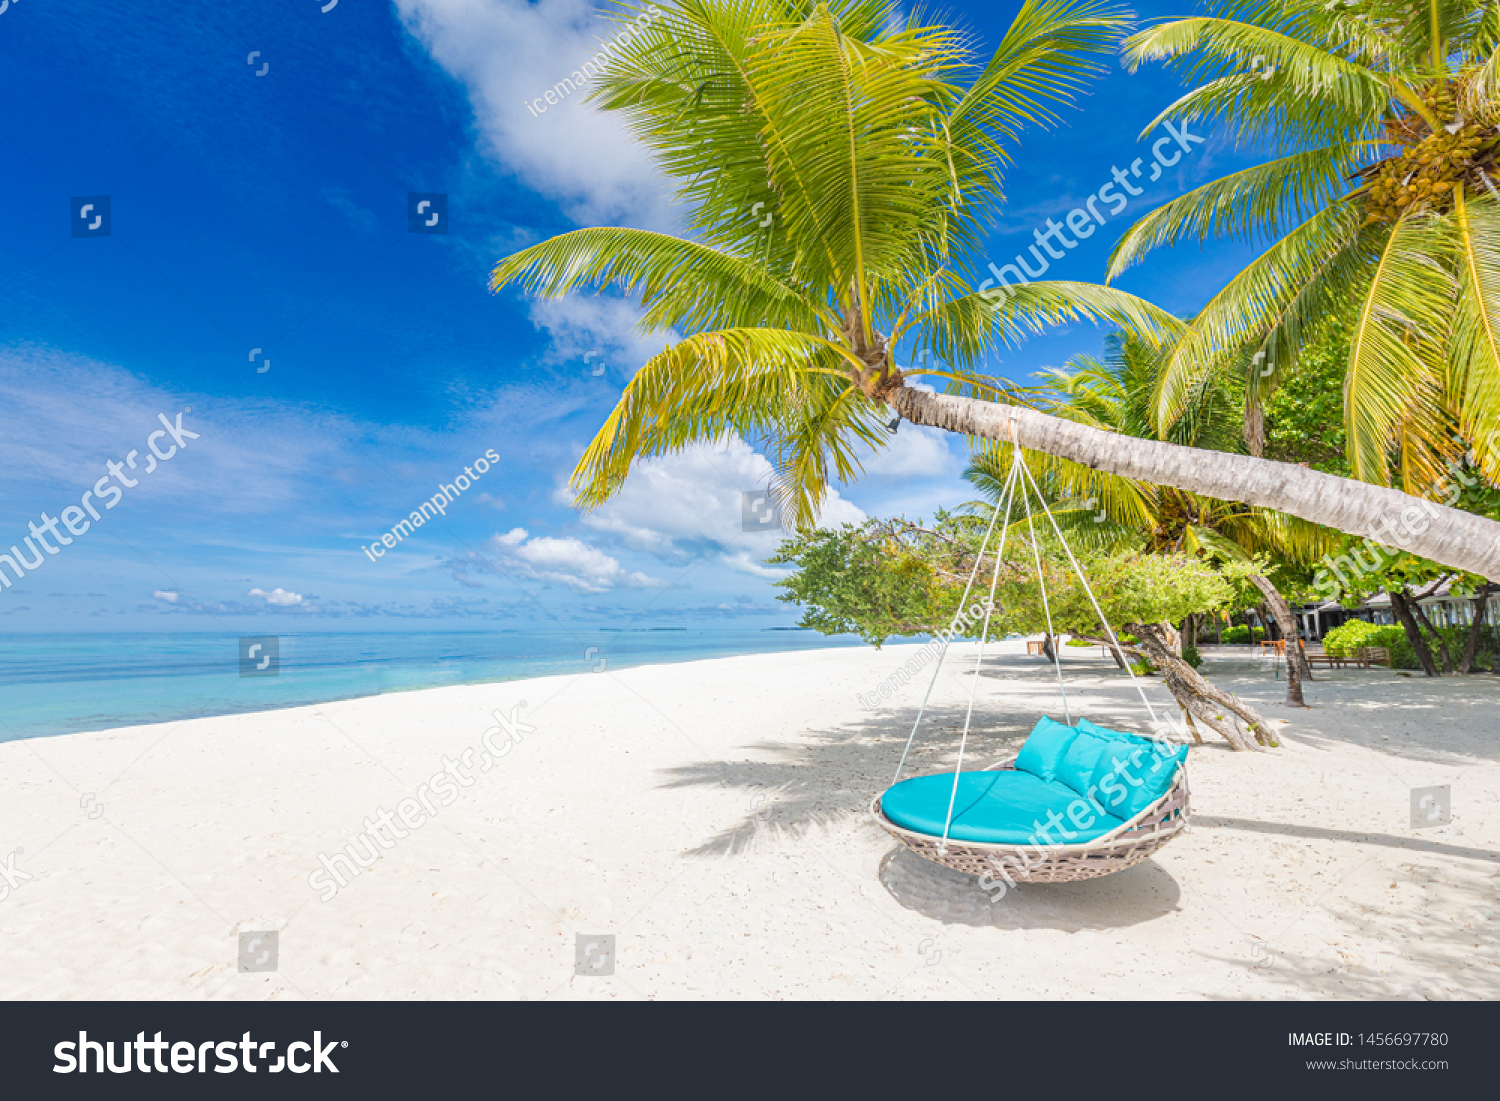 Yeele 10x8ft Beach Seaside Photography Background Tropical Coconut Tree Palm Tree Hammock Vacation Sandy Beach Summer Party Photo Backdrops Portrait Child Shooting Studio Props Wallpaper